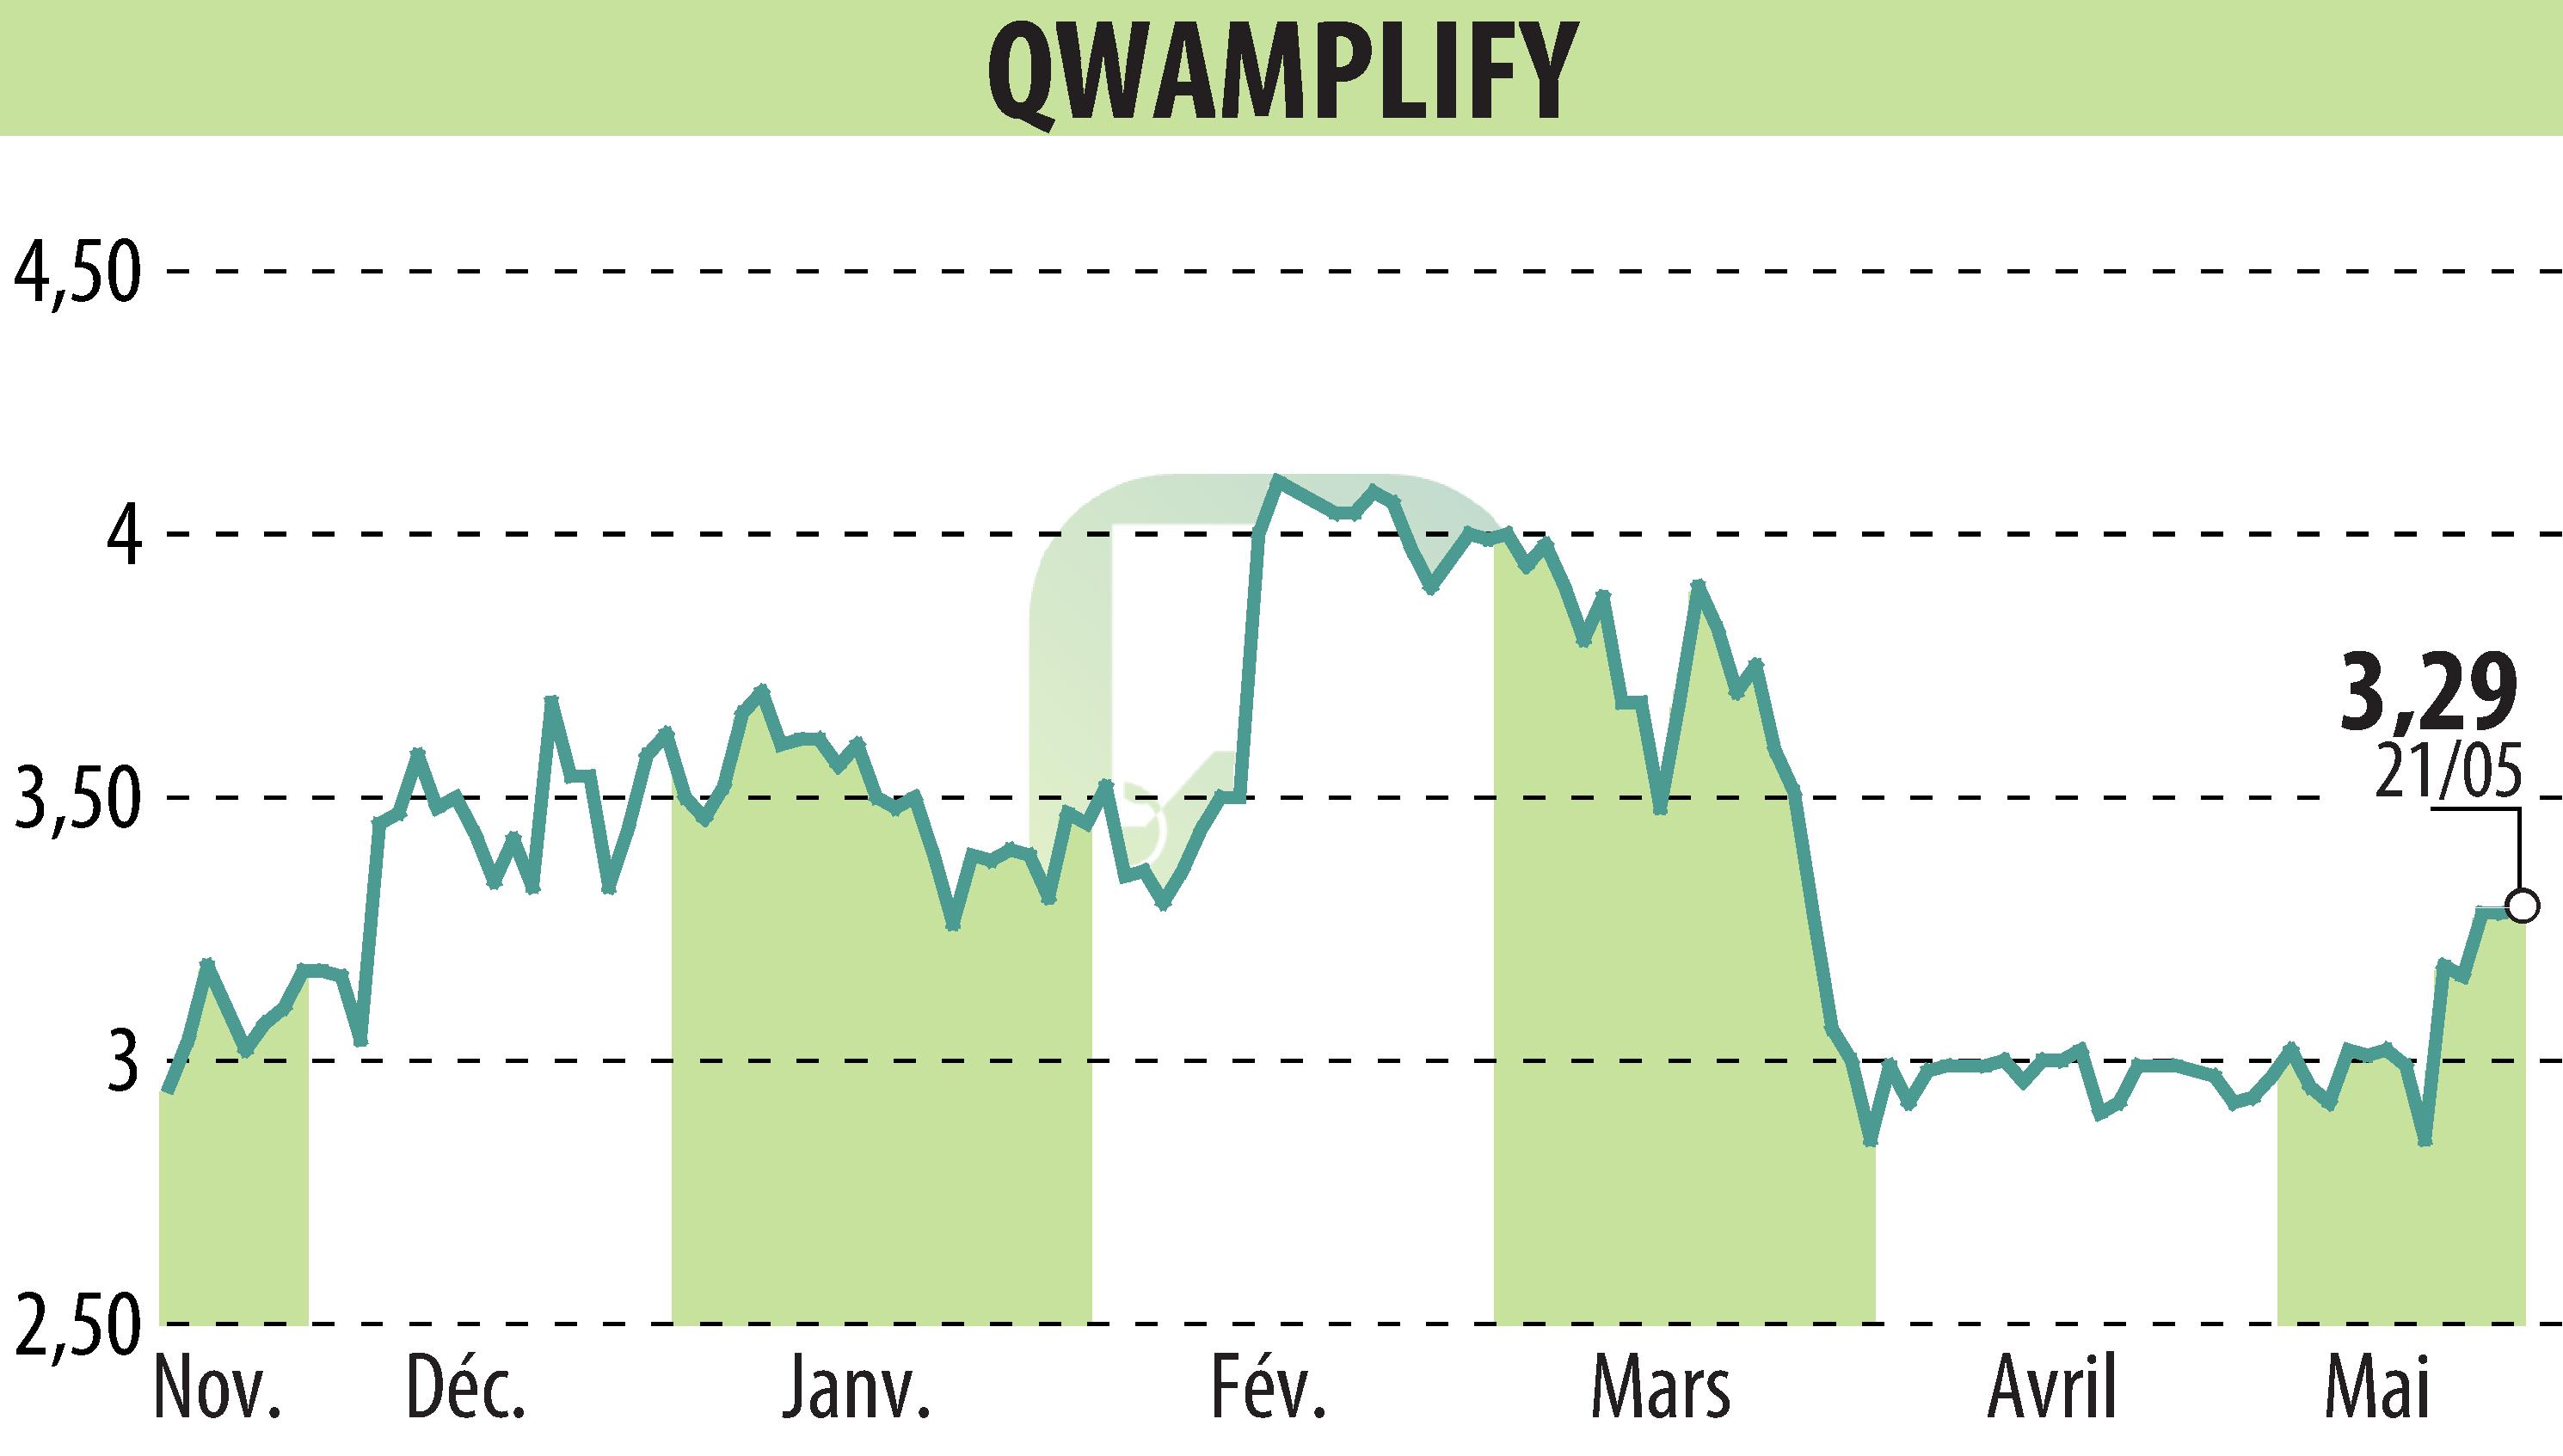 Stock price chart of QWAMPLIFY (EPA:ALQWA) showing fluctuations.